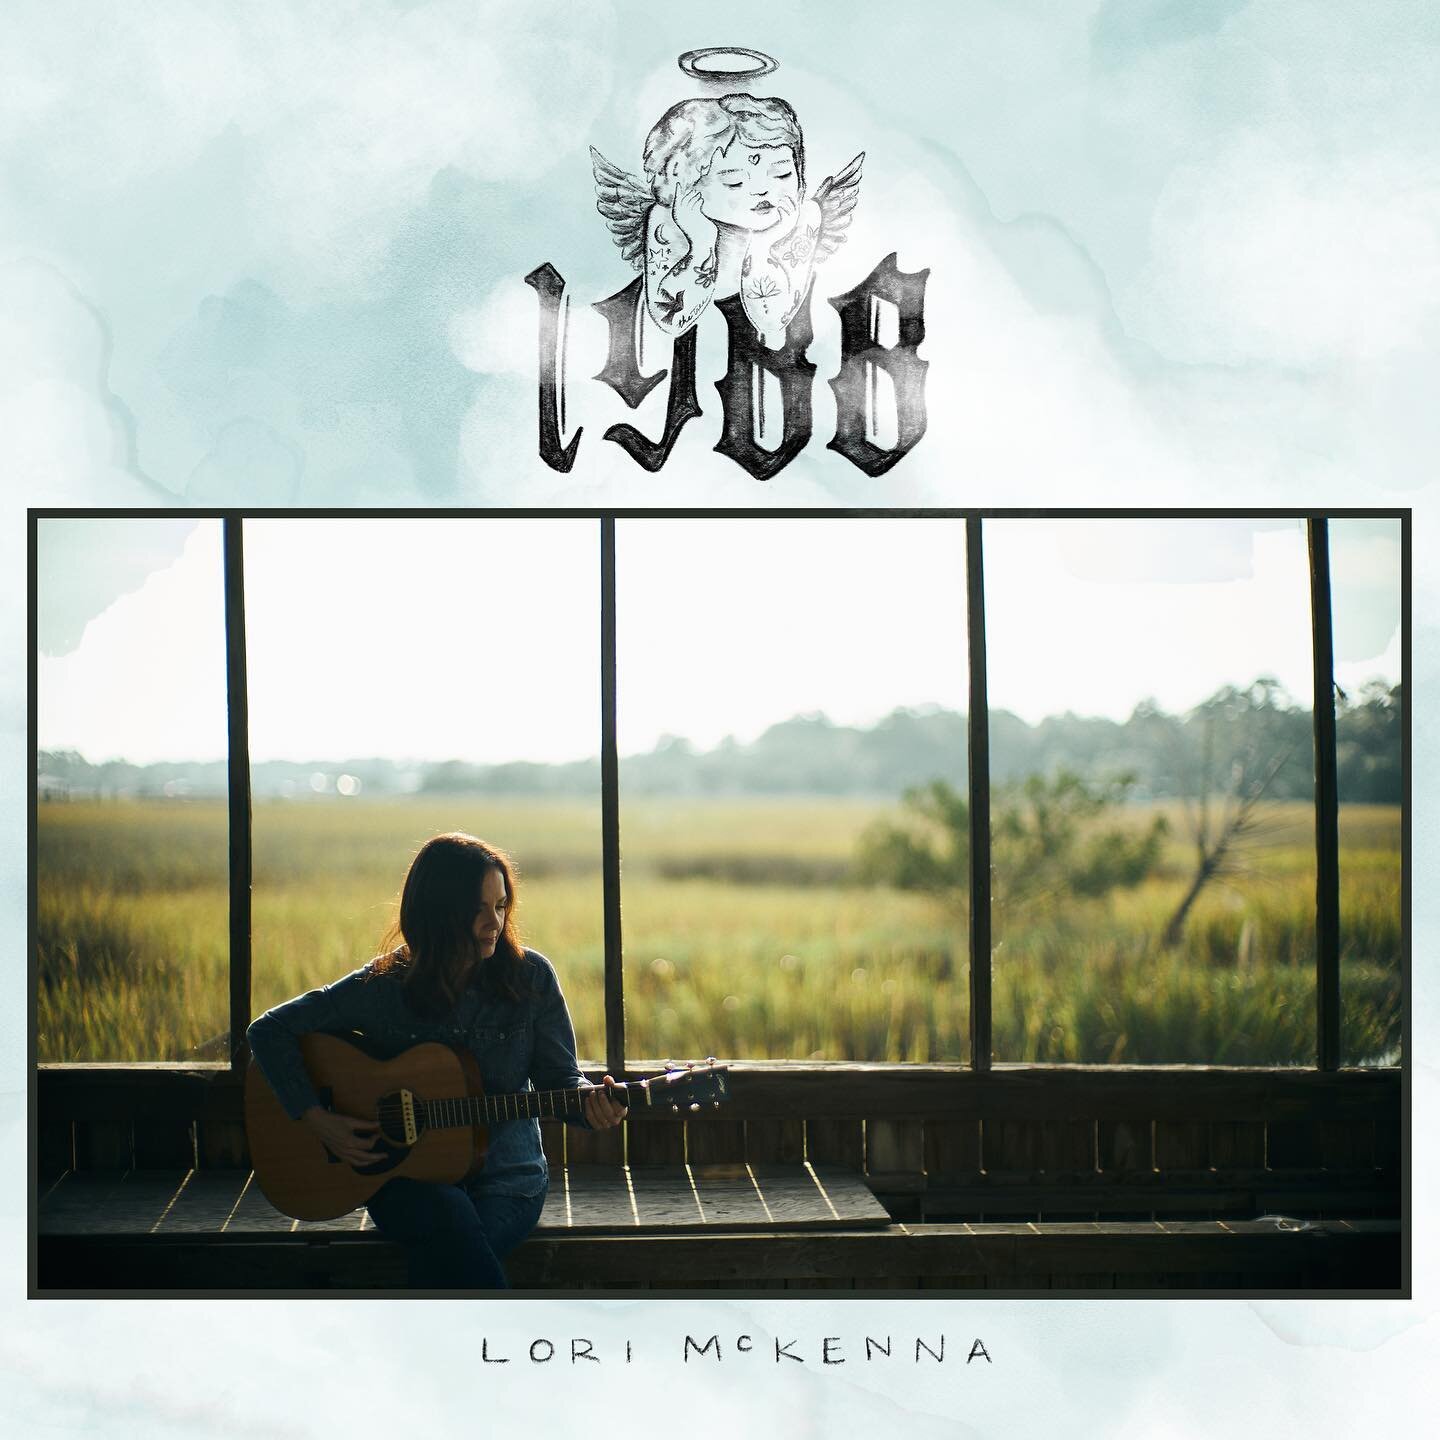 @lorimckennama just made a very big announcement 🫢

Her new album &ldquo;1988&rdquo; is coming out on July 21st! And the first single from the album is out today - &ldquo;Killing Me&rdquo; - written by @lorimckennama @lukerobert and @ifiwerehillaryl